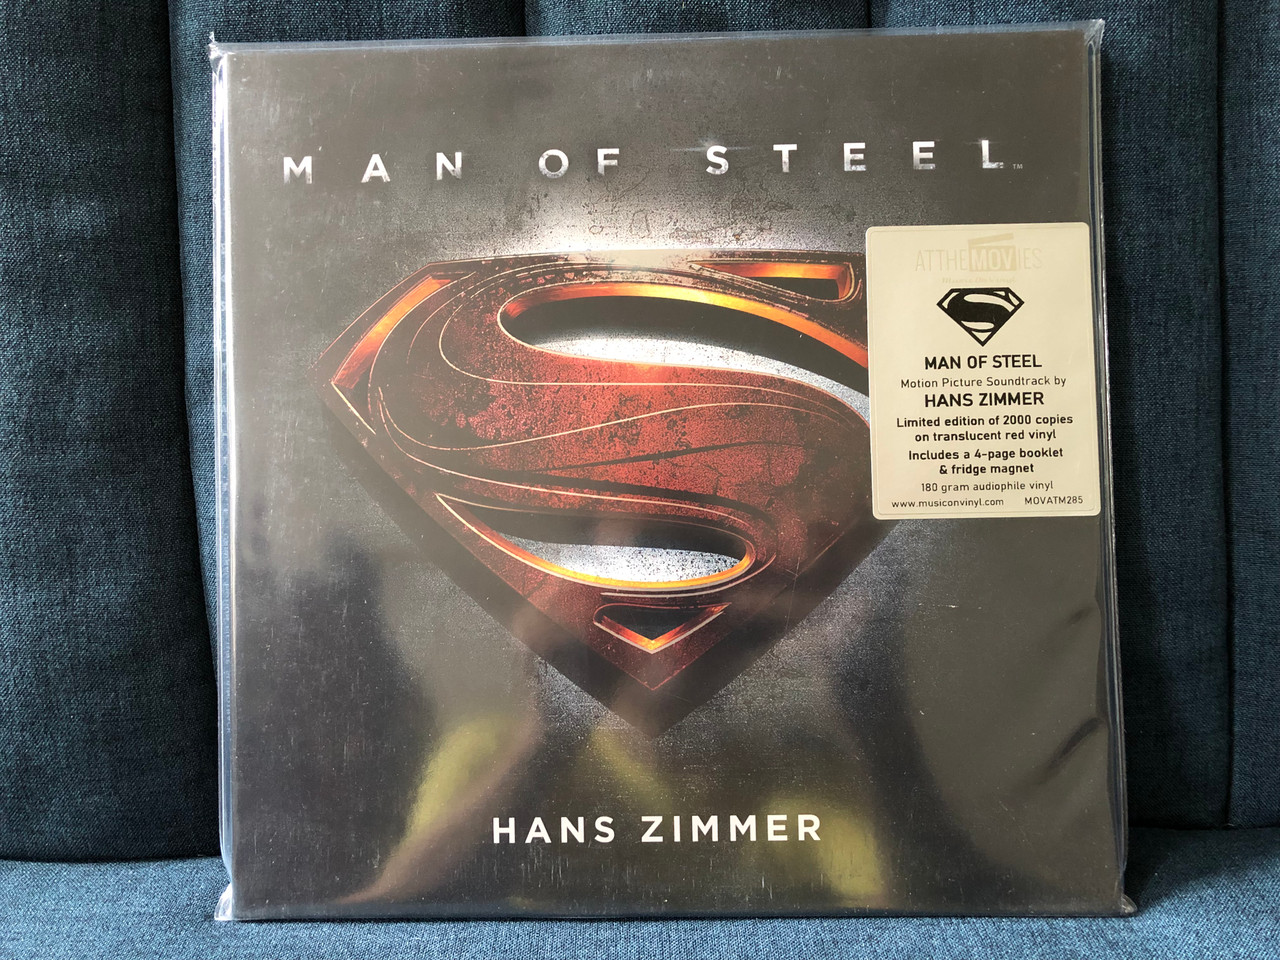 https://cdn10.bigcommerce.com/s-62bdpkt7pb/products/0/images/230415/Man_Of_Steel_-_Hans_Zimmer_Motion_Picture_Soundtrack_By_Hans_Zimmer._Limited_edition_of_2008_copies_on_translucent_red_vinyl._Includes_a_4-page_booklet_fridge_magnet._180_gram_audiophile_v_1__17434.1654014649.1280.1280.JPG?c=2&_gl=1*11efl2a*_ga*MjA2NTIxMjE2MC4xNTkwNTEyNTMy*_ga_WS2VZYPC6G*MTY1NDAwNTAzNy40MTUuMS4xNjU0MDE0NTk4LjYw